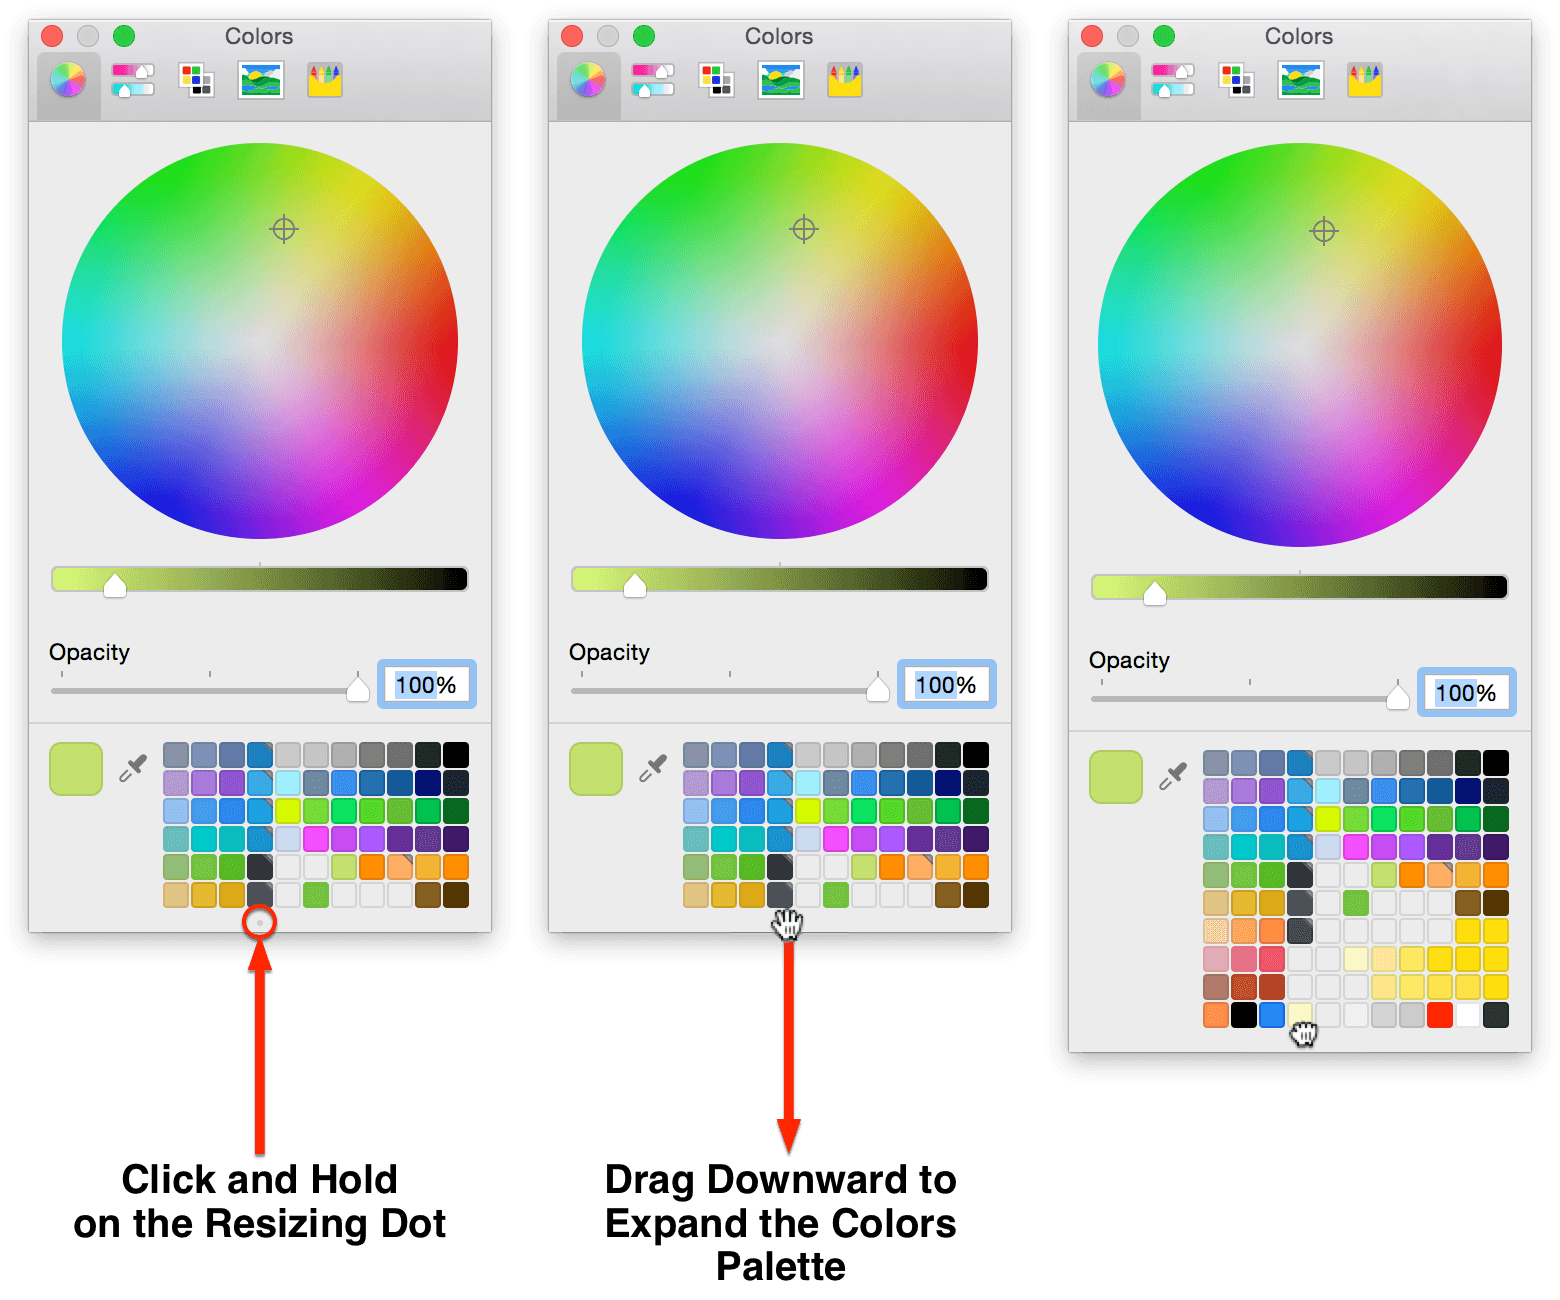 Expanding your color chit options